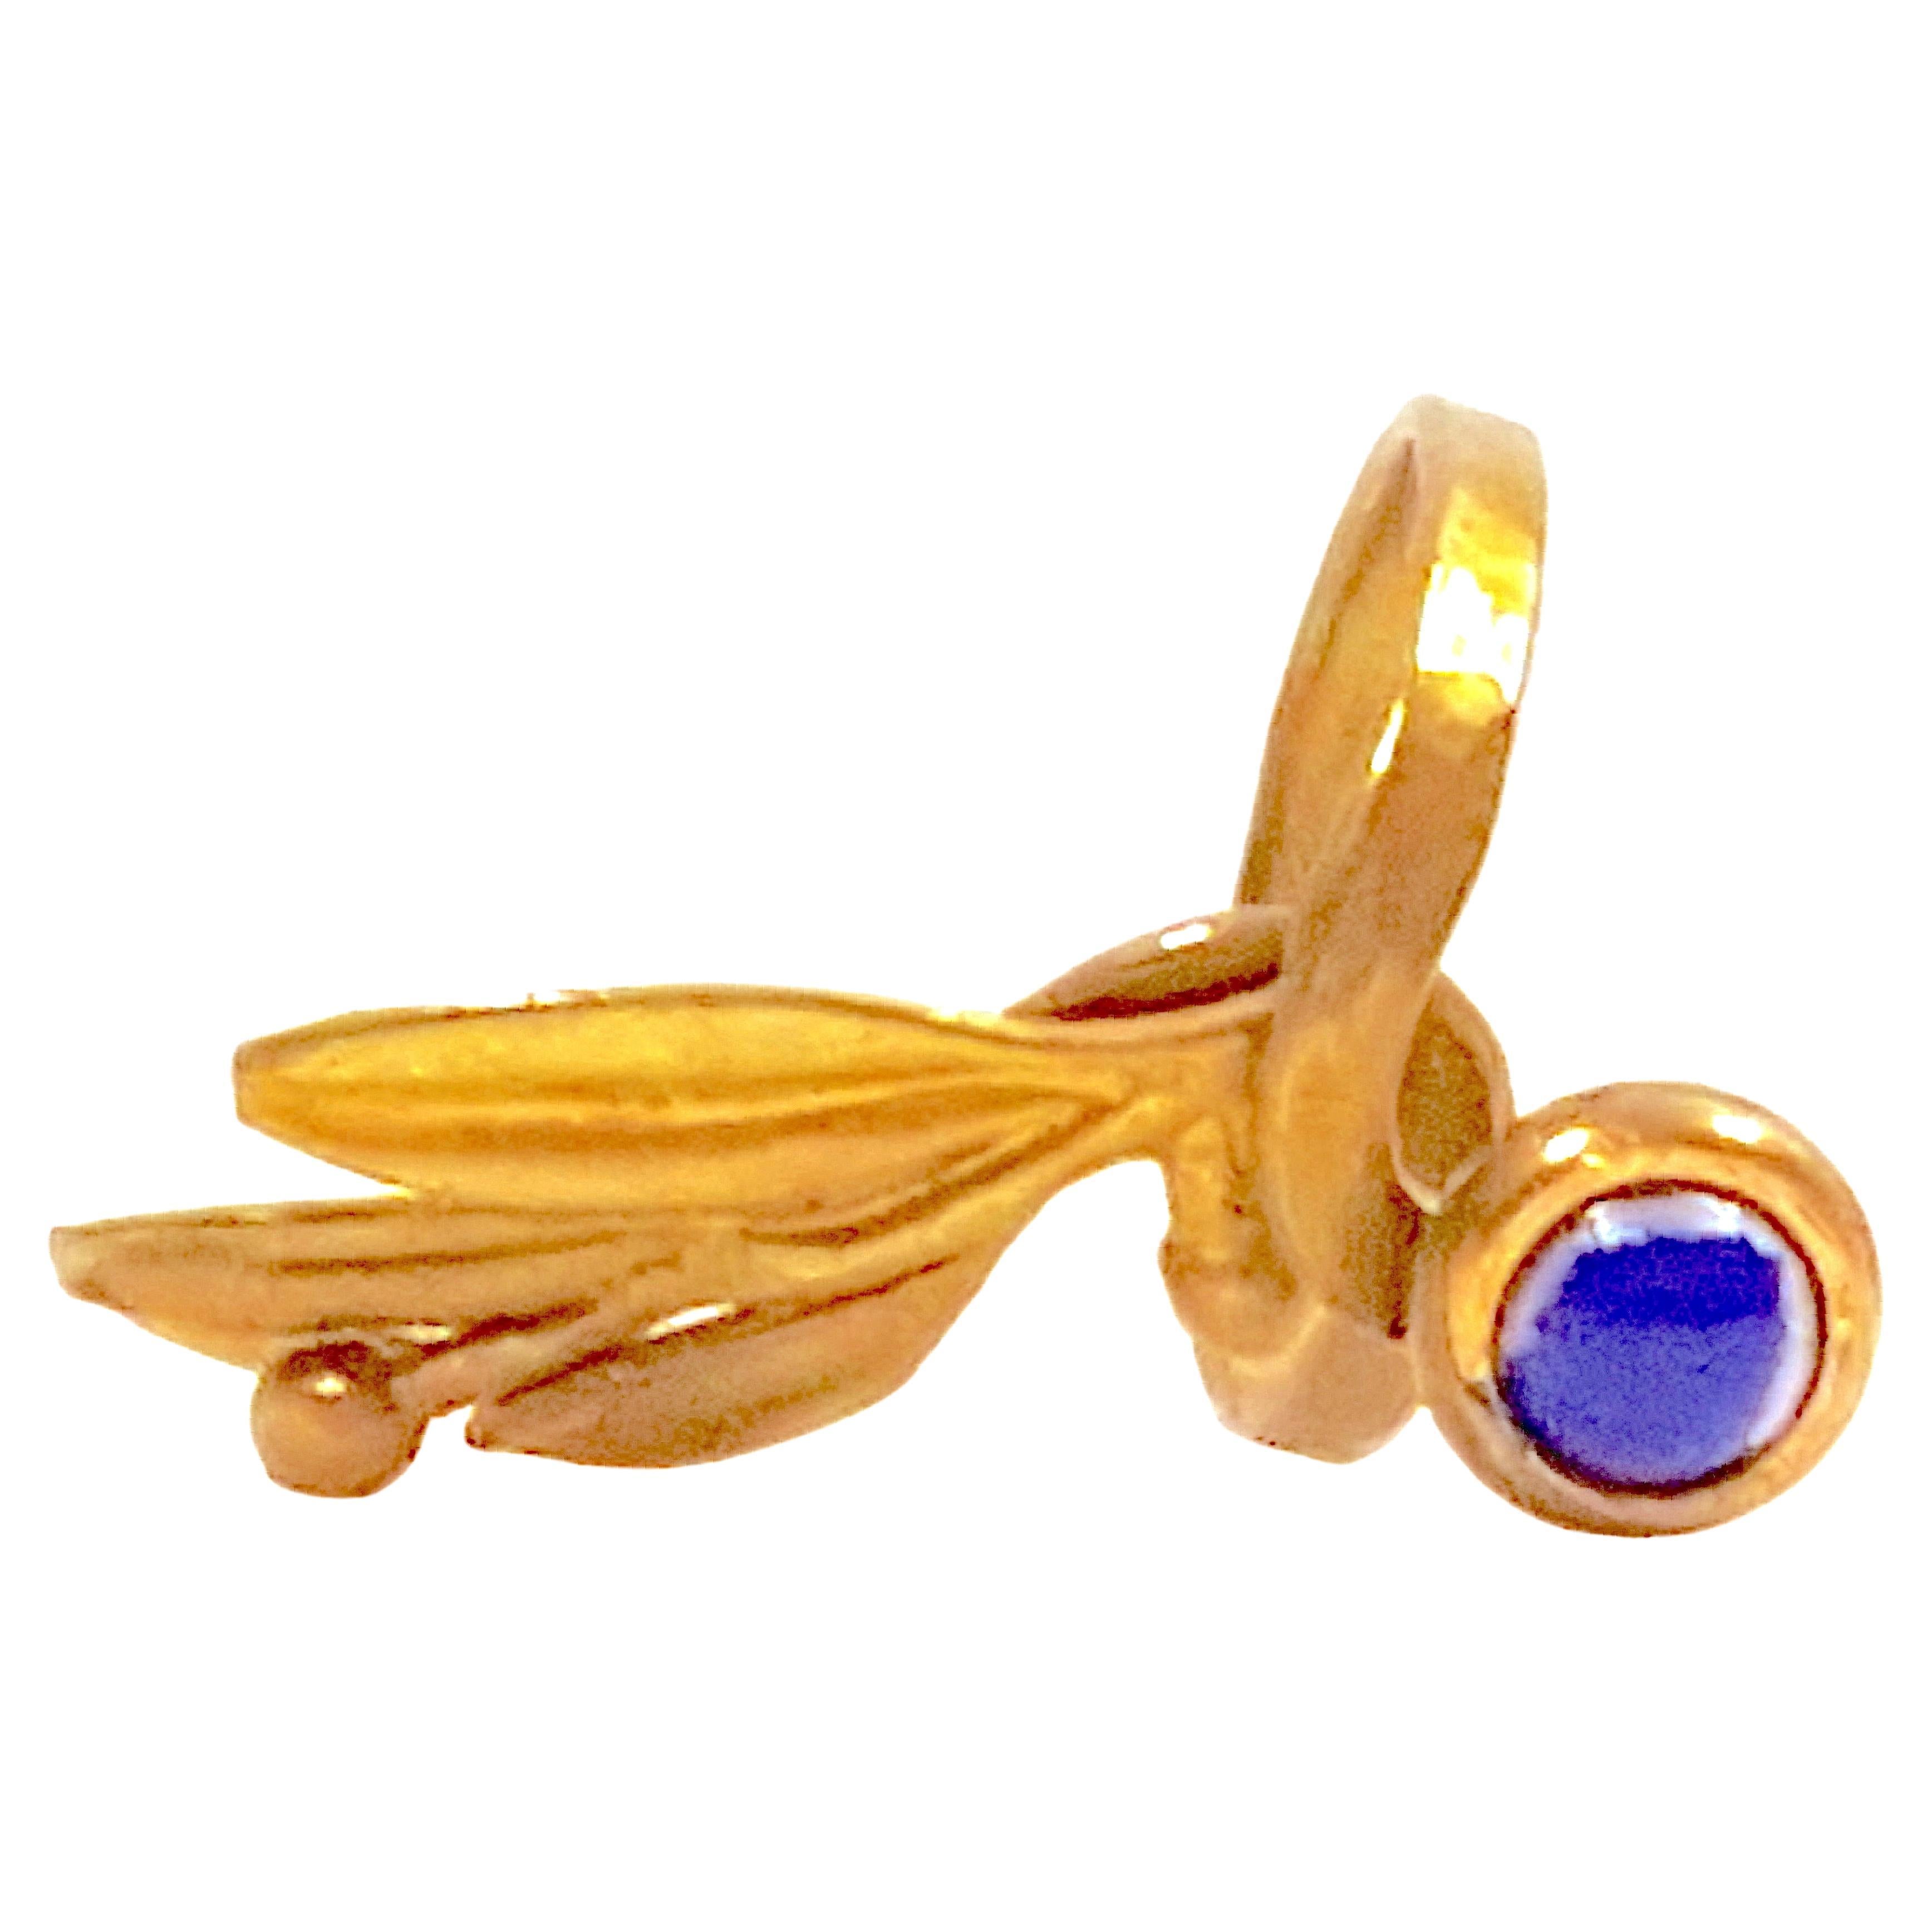 Found in Greece, this ancient style gold-smithed sculptural open-work ring features at its raised end a bezel-set lapis cabochon, while the other end of the by-pass band below is shaped like a sprig of laurel leaves or miniature olive branch. While